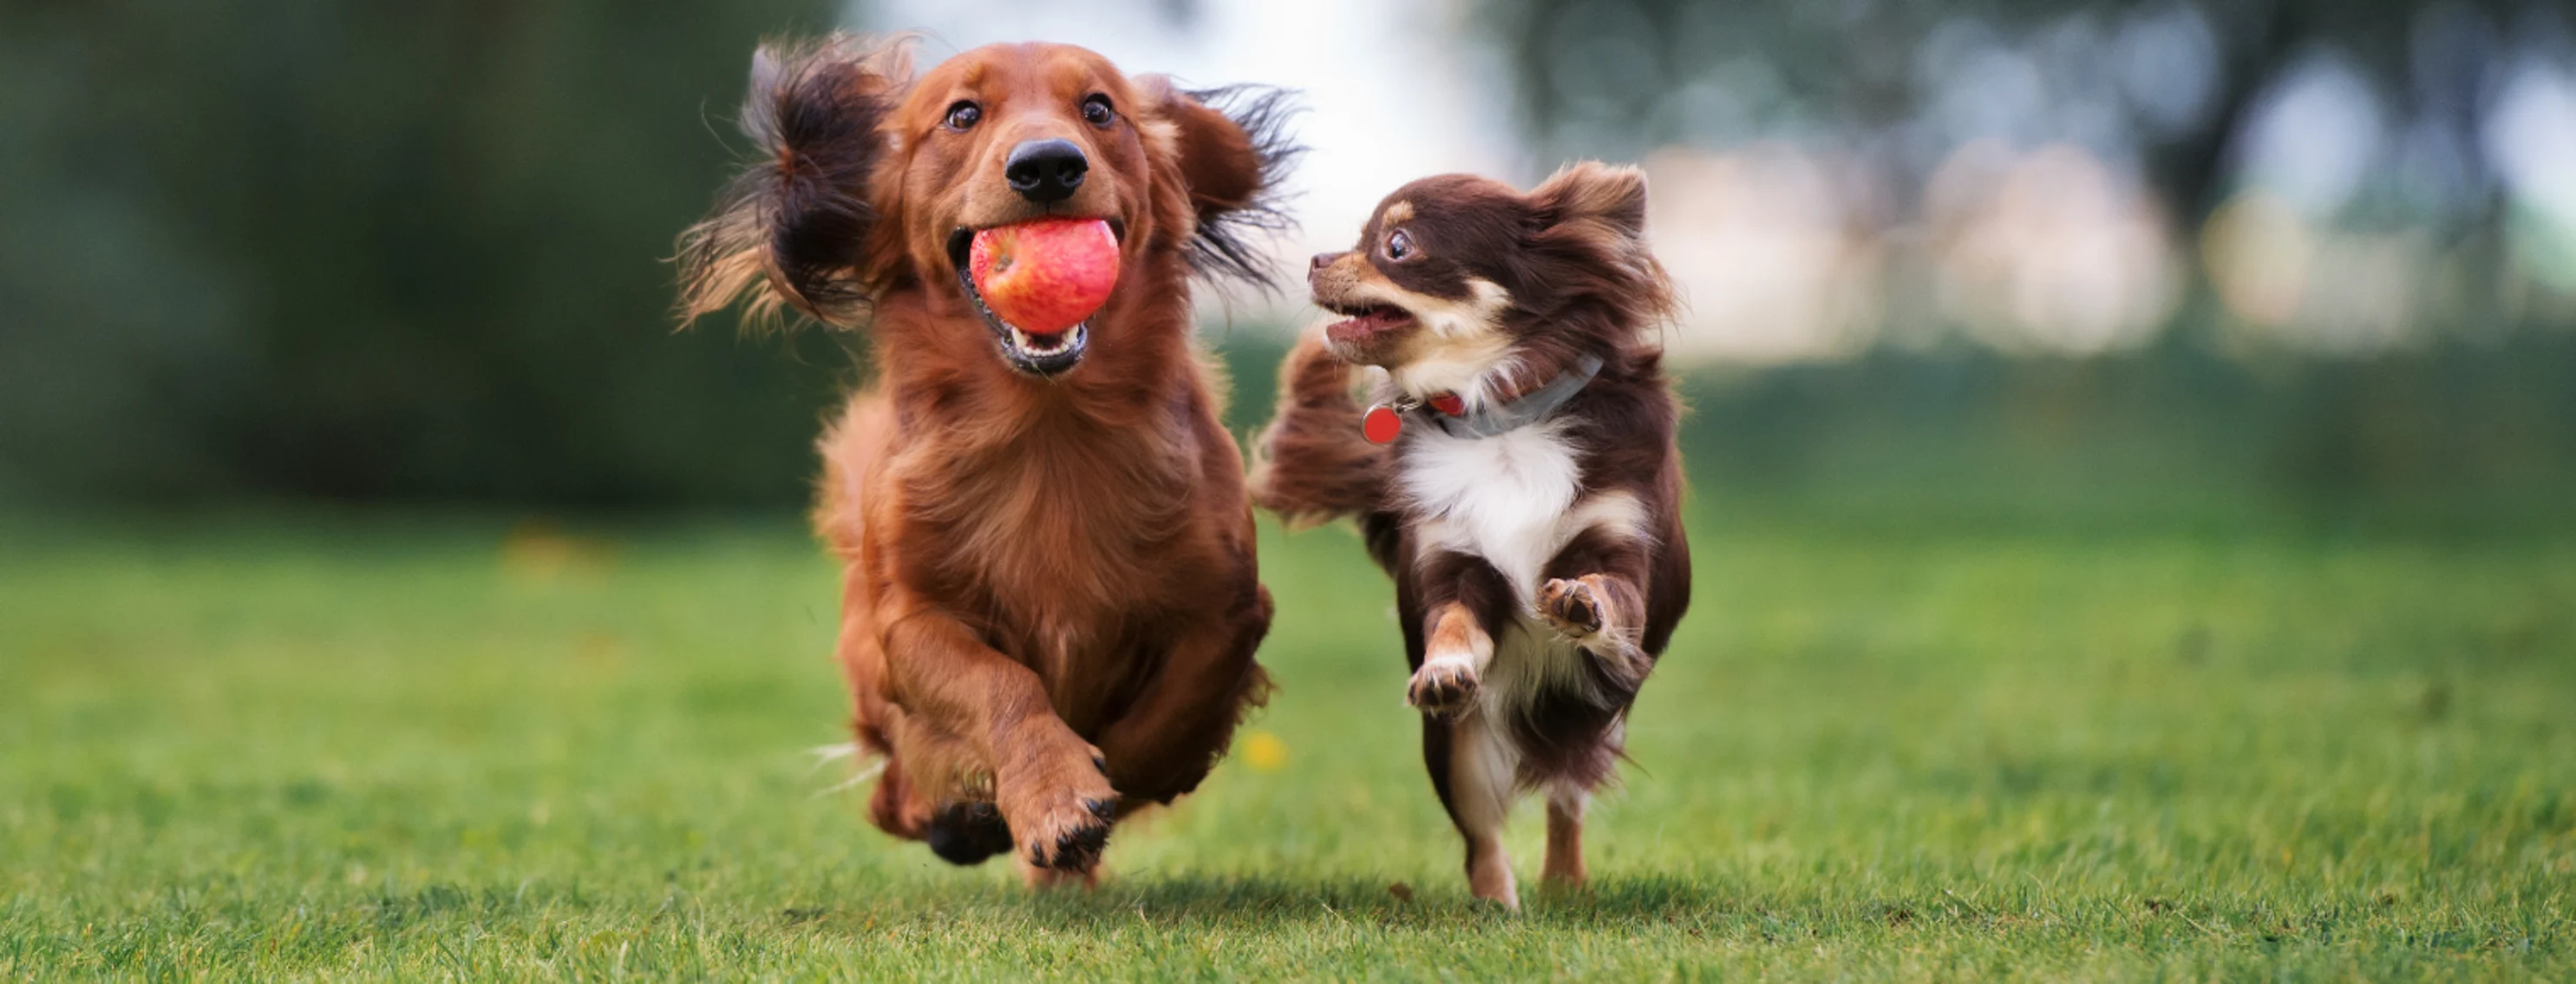 Two Dogs Running & One is Holding an Apple